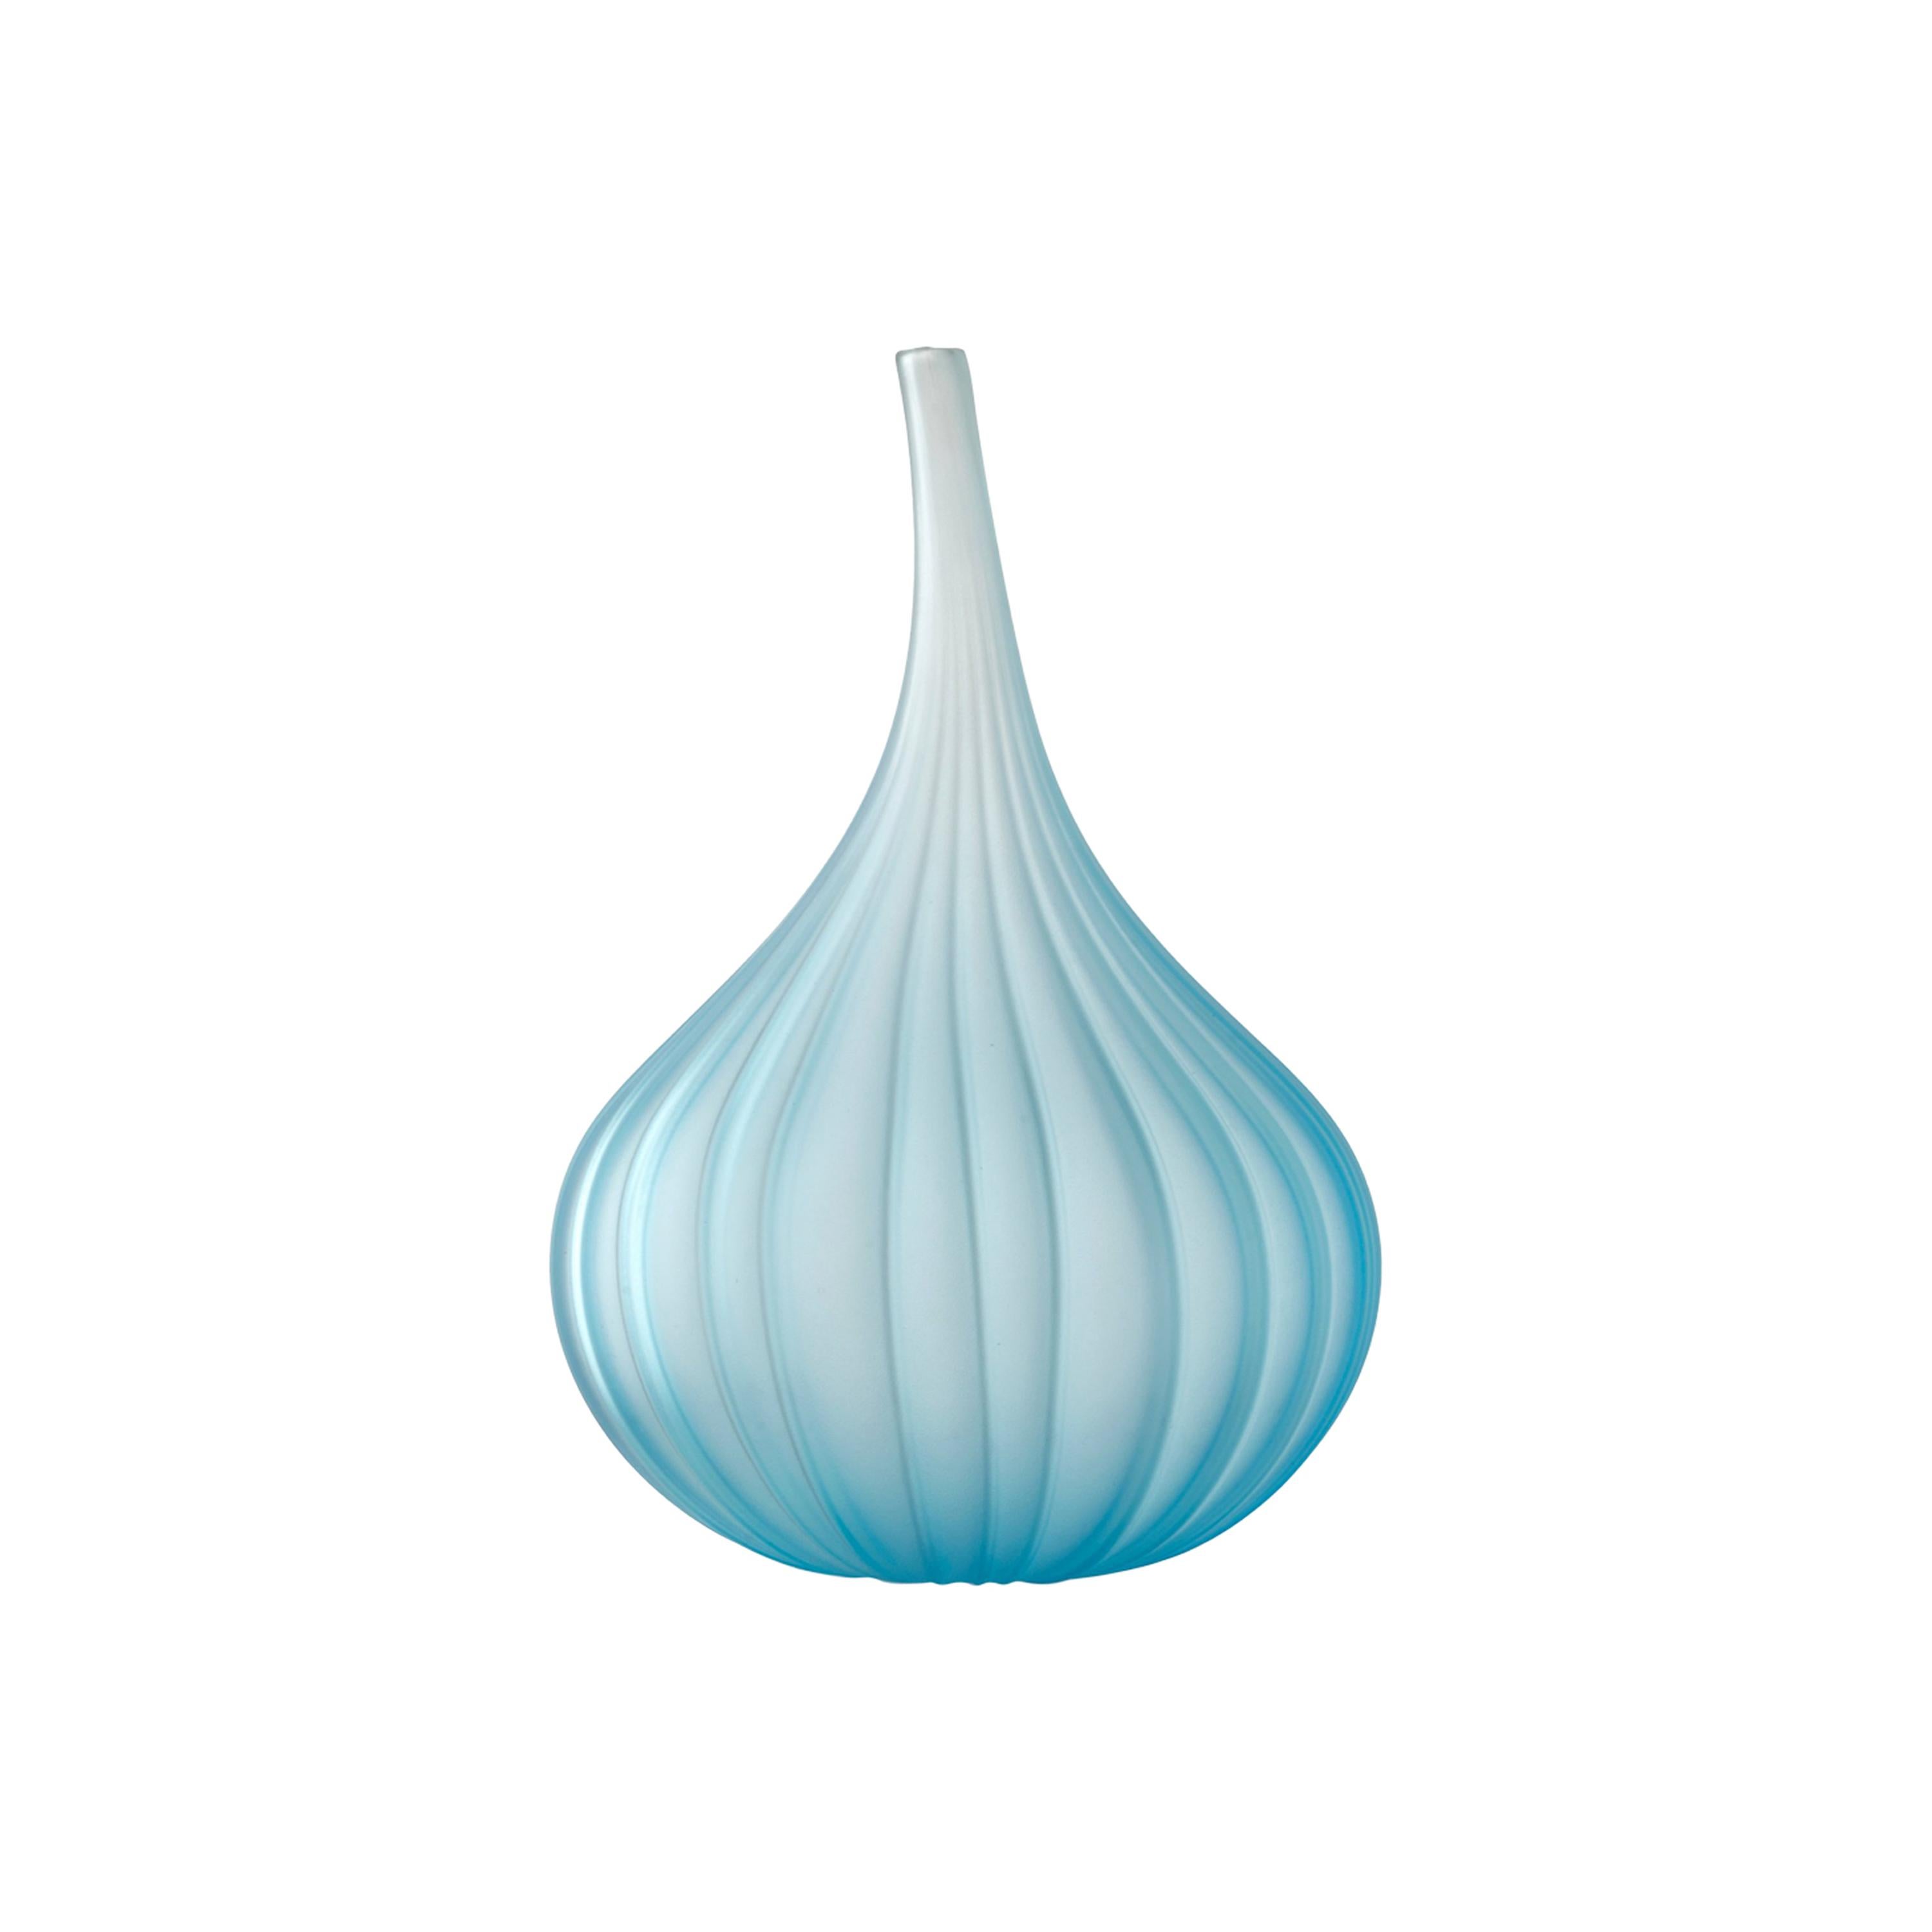 Salviati Small Drops Vase in Satin Teal Glass by Renzo Stellon For Sale